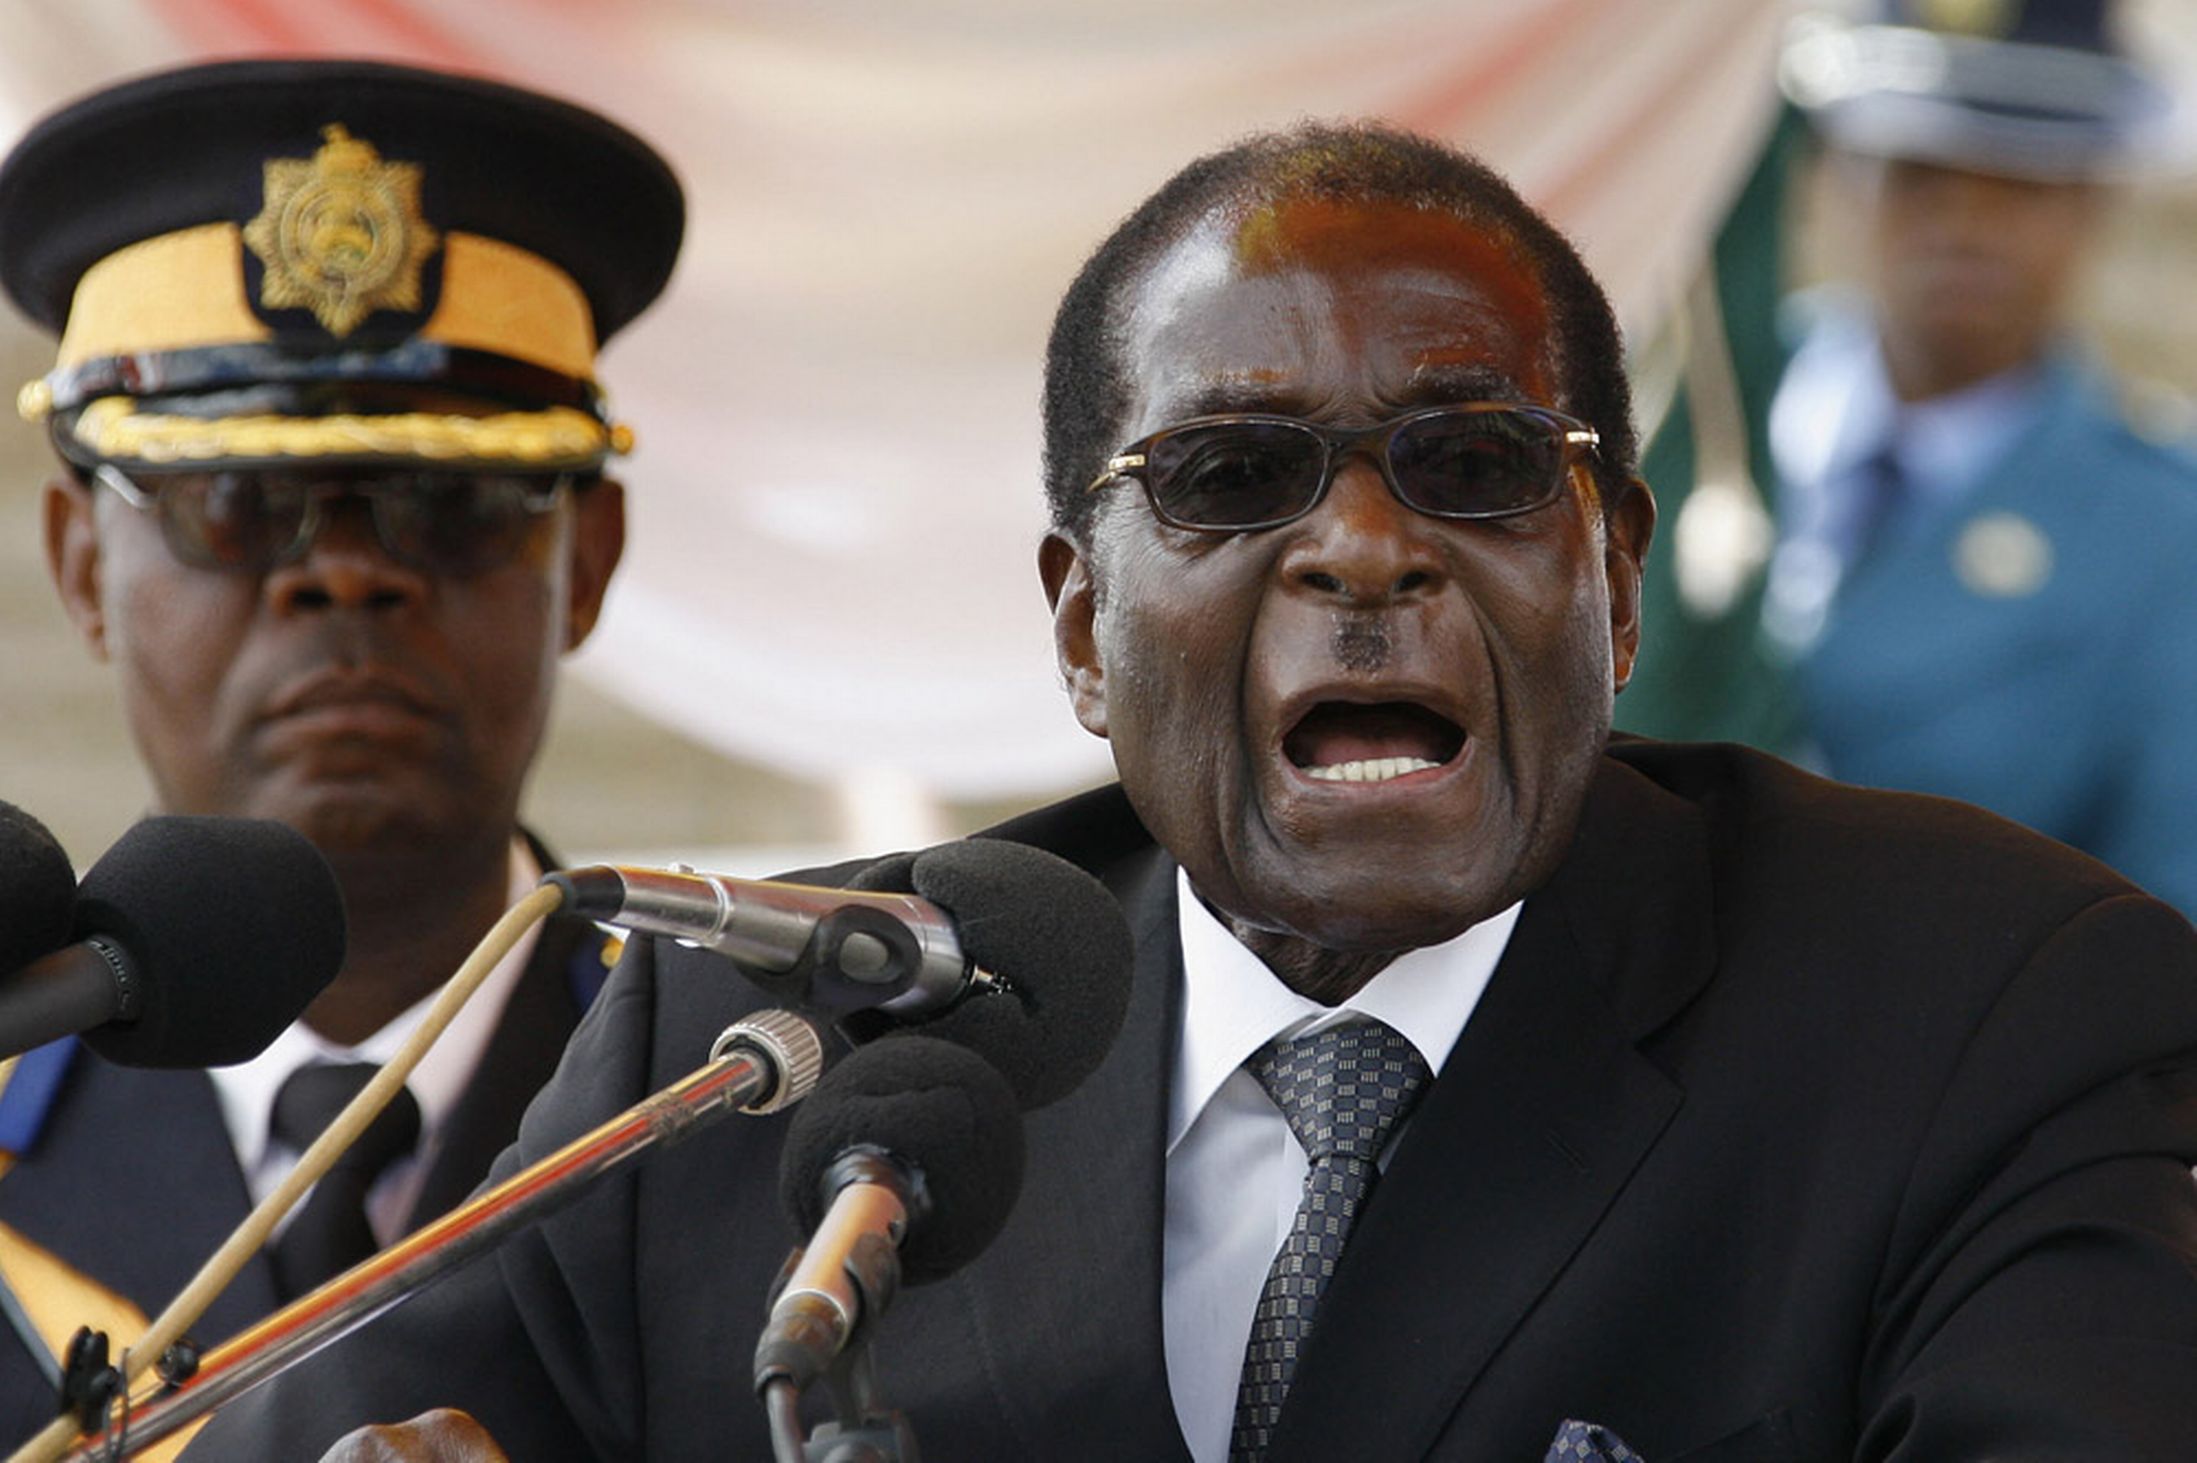 "Don't drink at all, don't smoke, you must exercise and eat vegetables and fruit." <i>â€“Robert Mugabe (1924-, Prime Minister of Zimbabwe, accused of many crimes against humanity)</i>